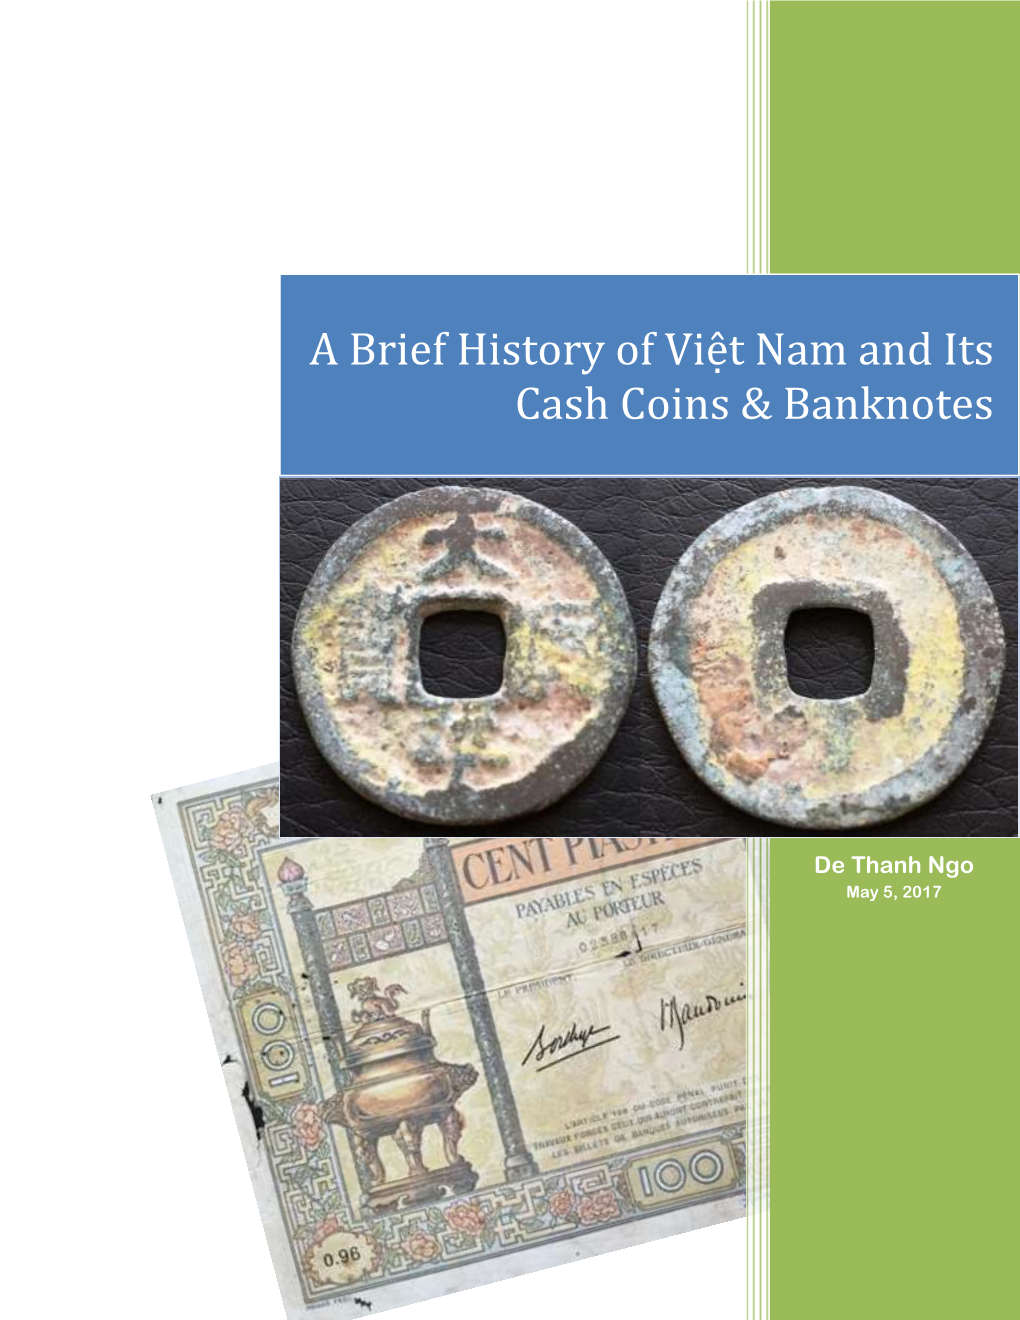 A Brief History of Việt Nam and Its Cash Coins & Banknotes